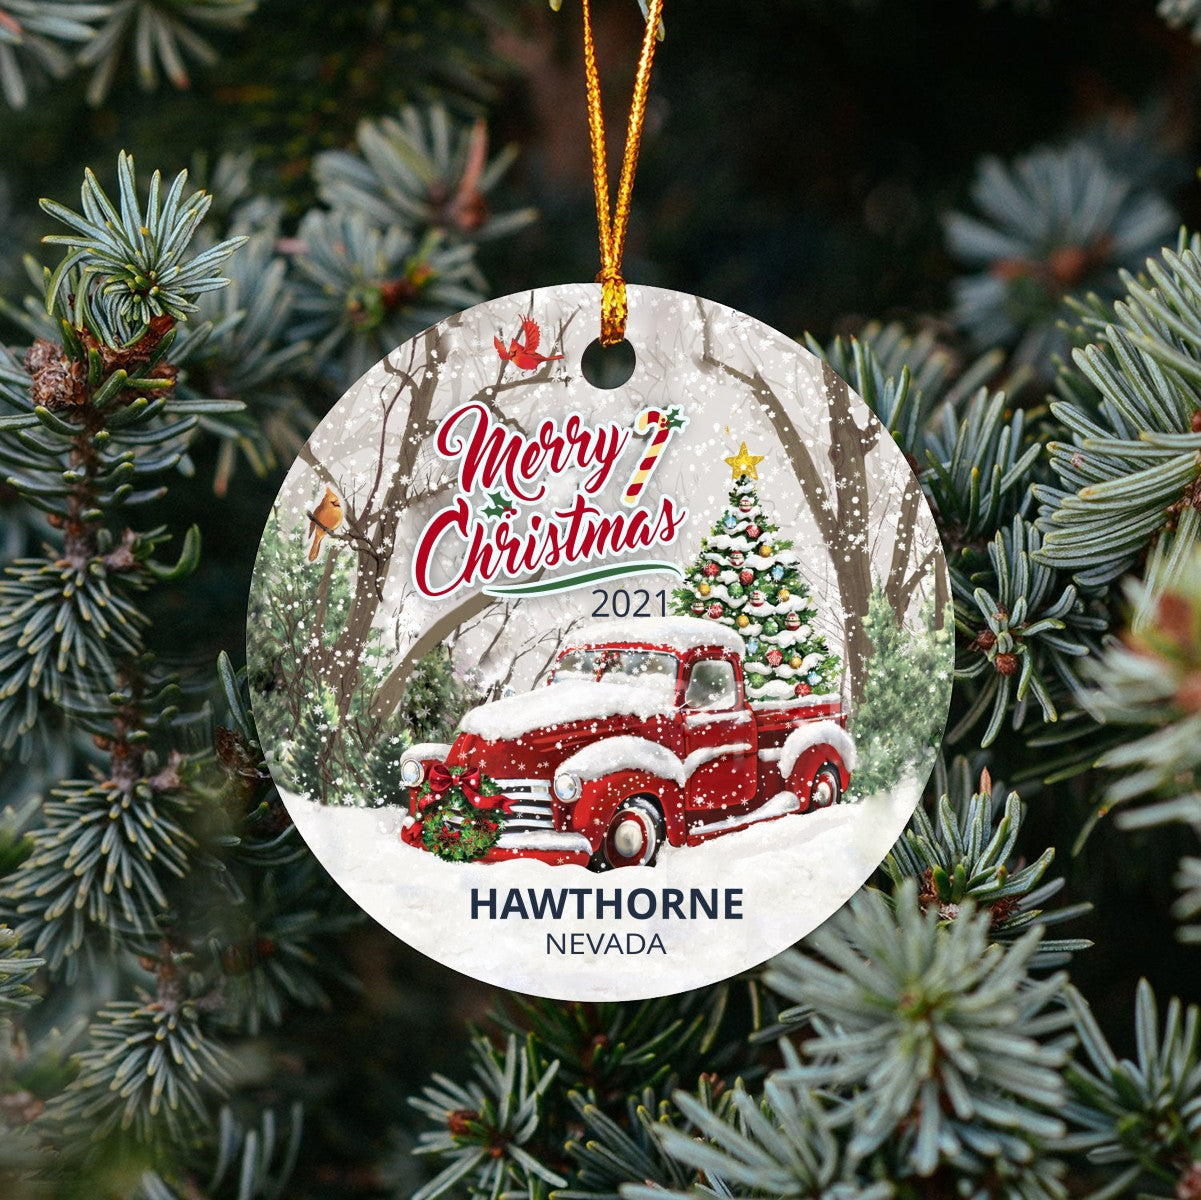 Christmas Tree Ornaments Hawthorne - Ornament With Name City, State Hawthorne Nevada NV Ornament - Red Truck Xmas Ornaments 3'' Plastic Gift For Family, Friend And Housewarming